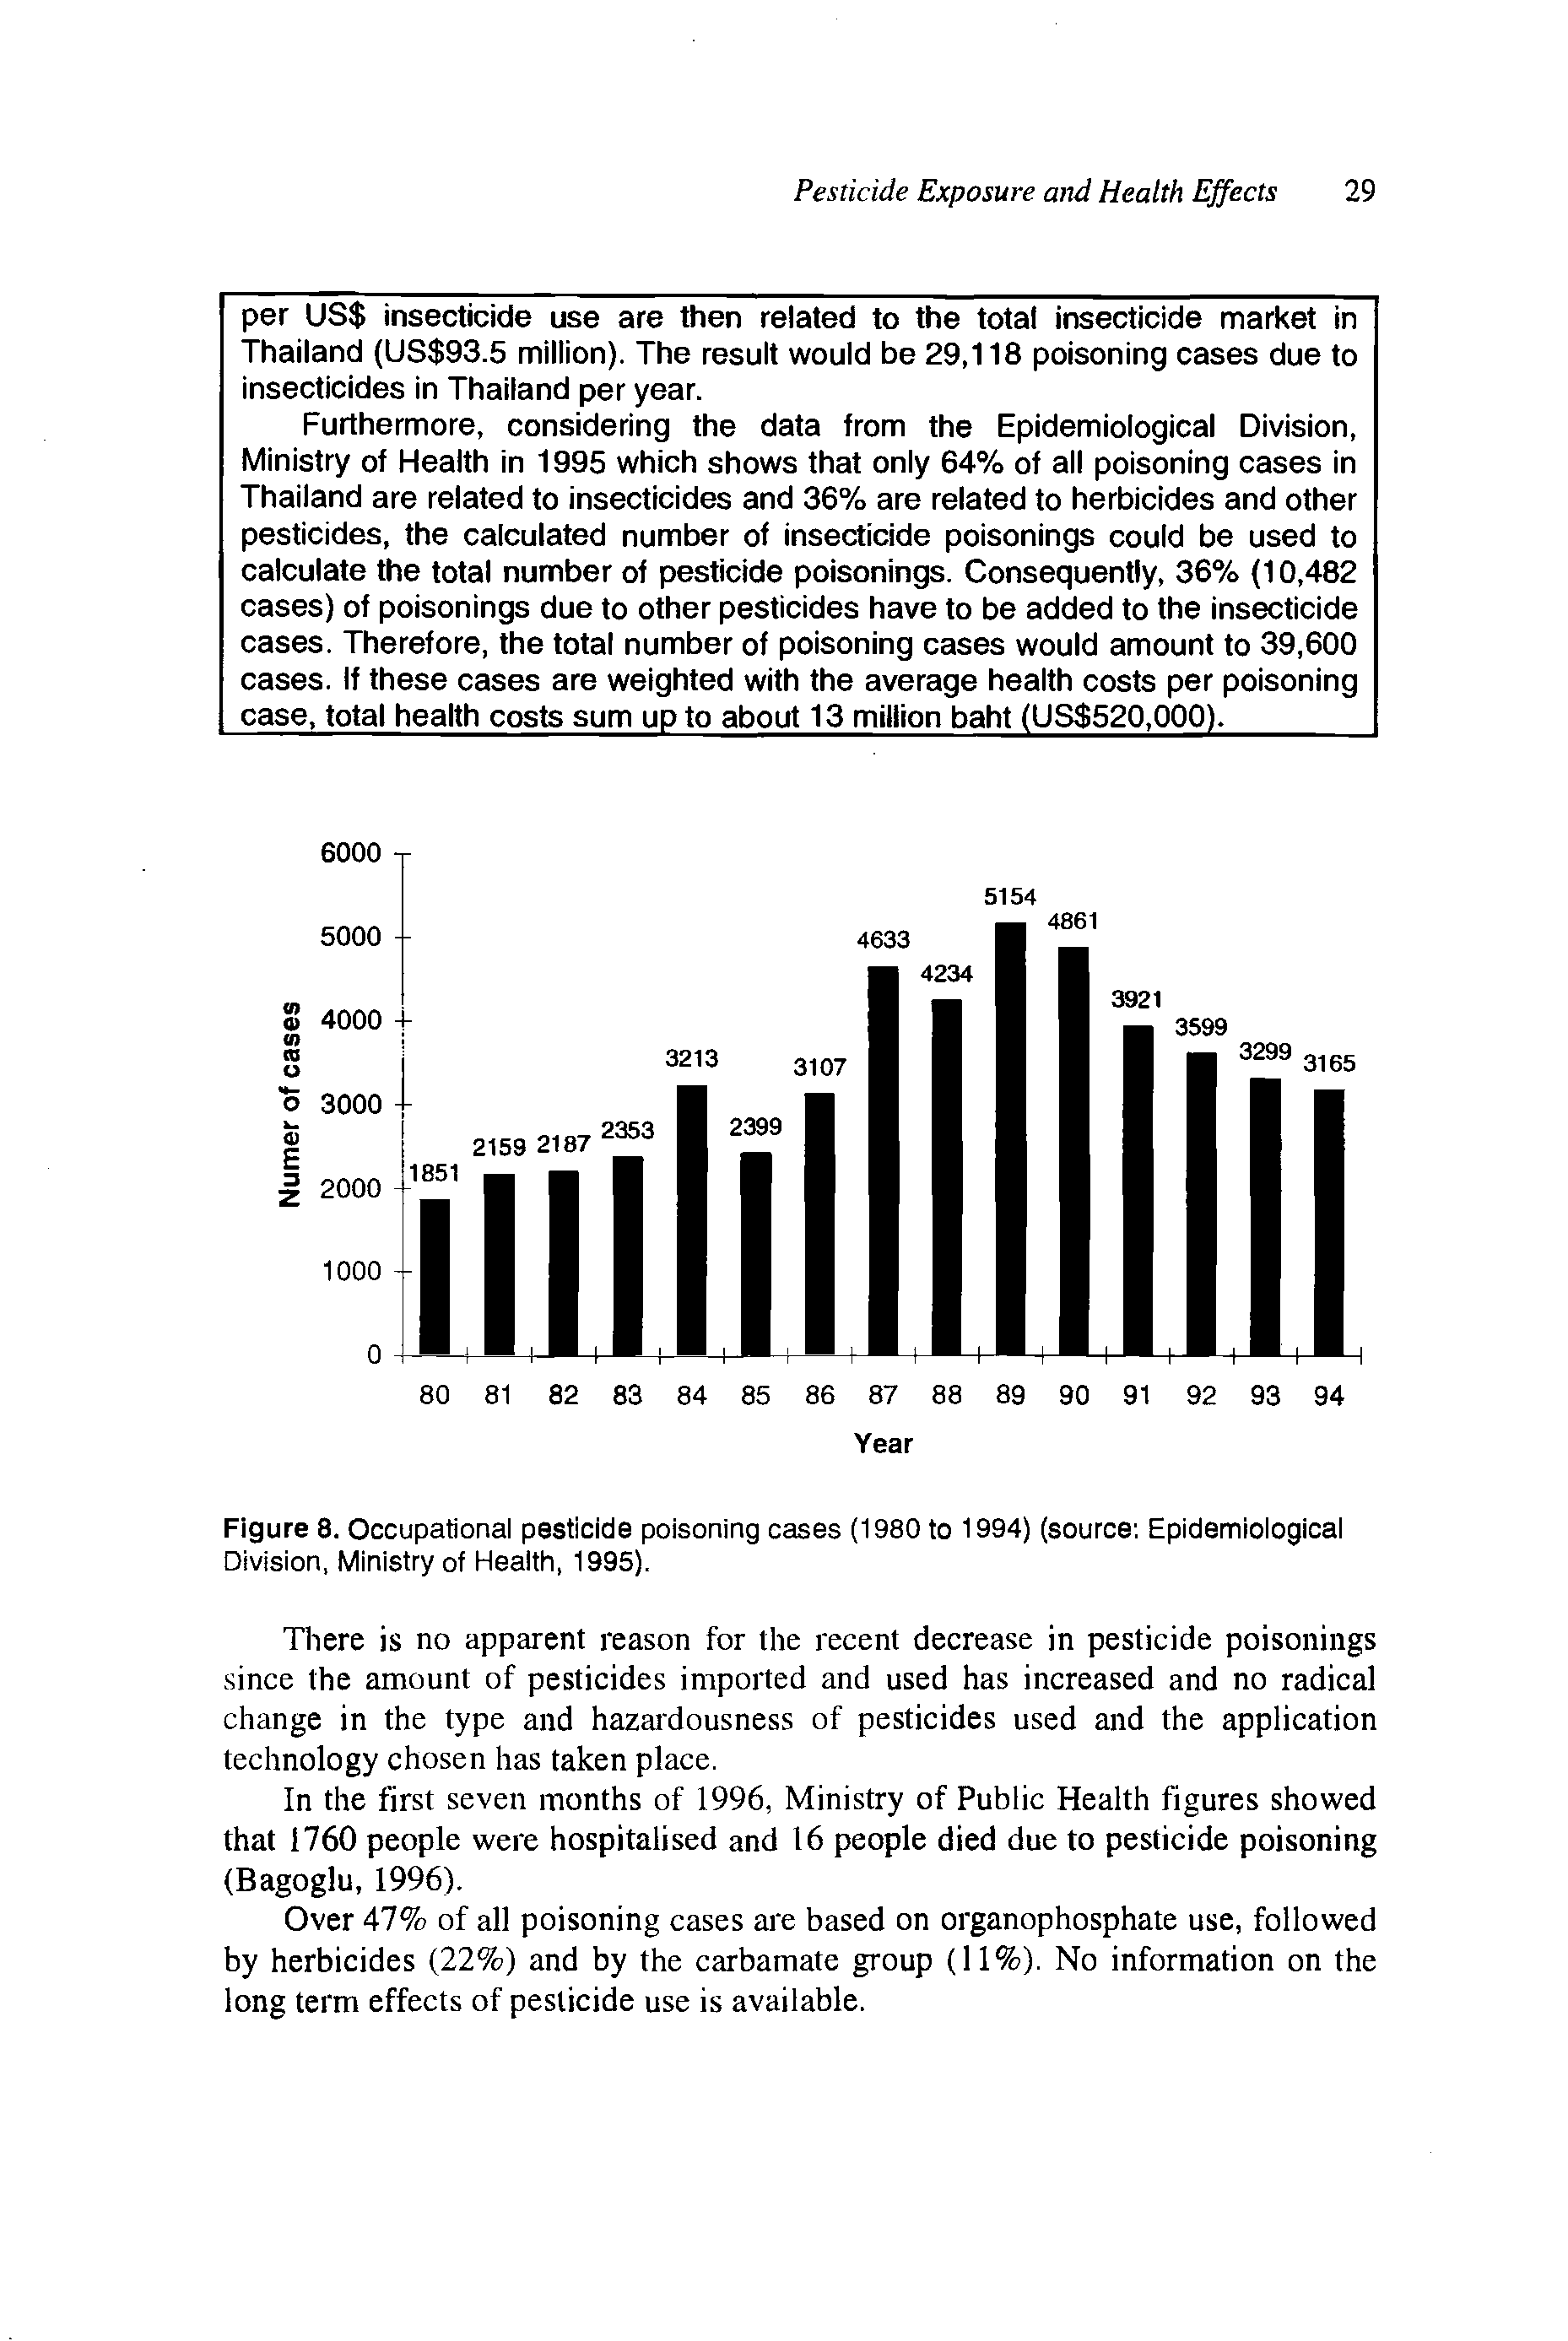 Figure 8. Occupational pesticide poisoning cases (1980 to 1994) (source Epidemiological Division, Ministry of Health, 1995).